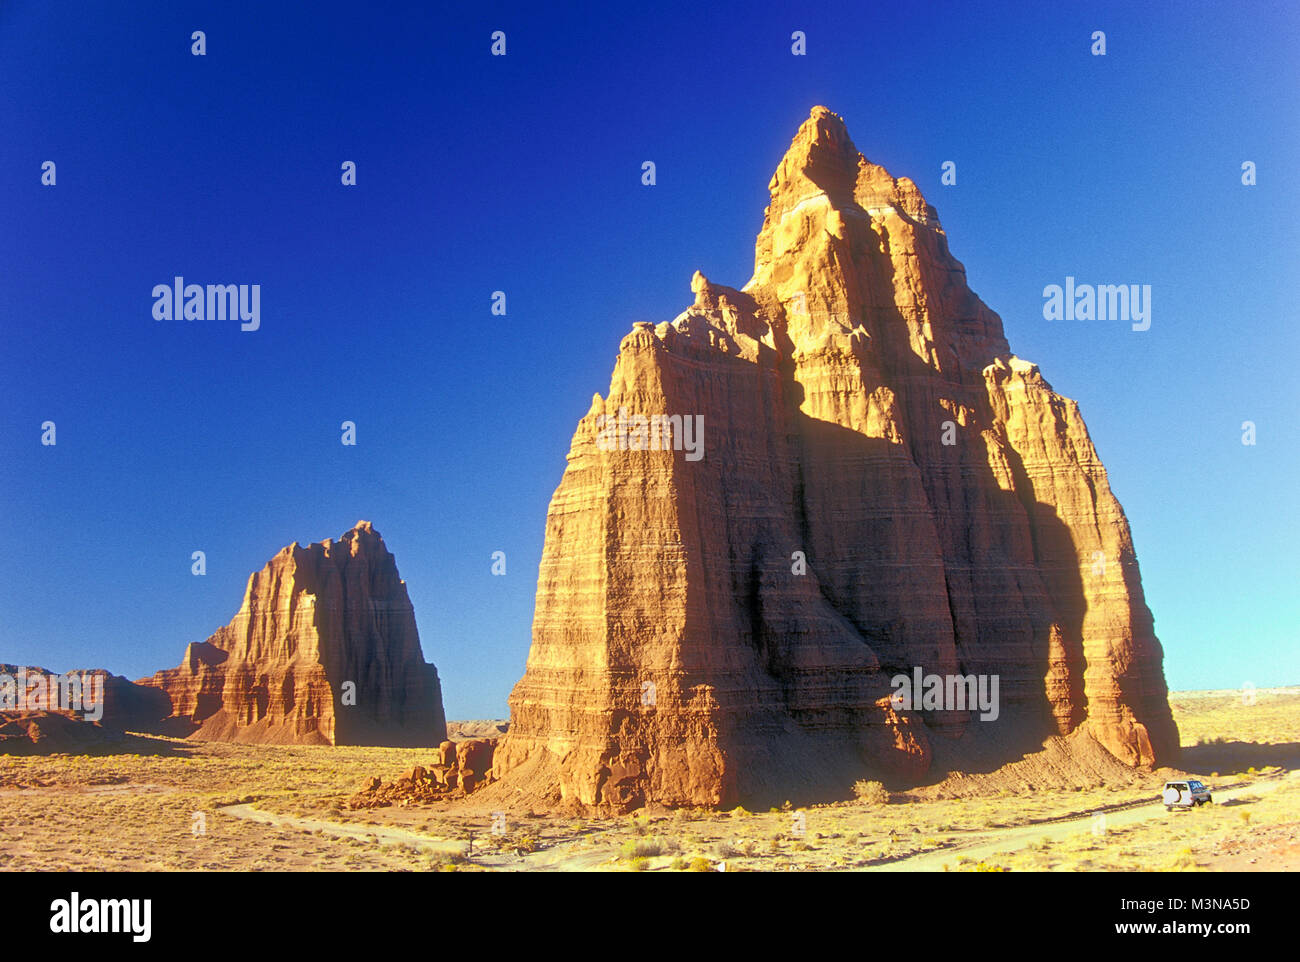 Late day's strong light illuminates the Temple of the Sun (L) and Temple of the Moon (R), monoliths in Cathedral Valley, Capitol Reef National Park, s Stock Photo